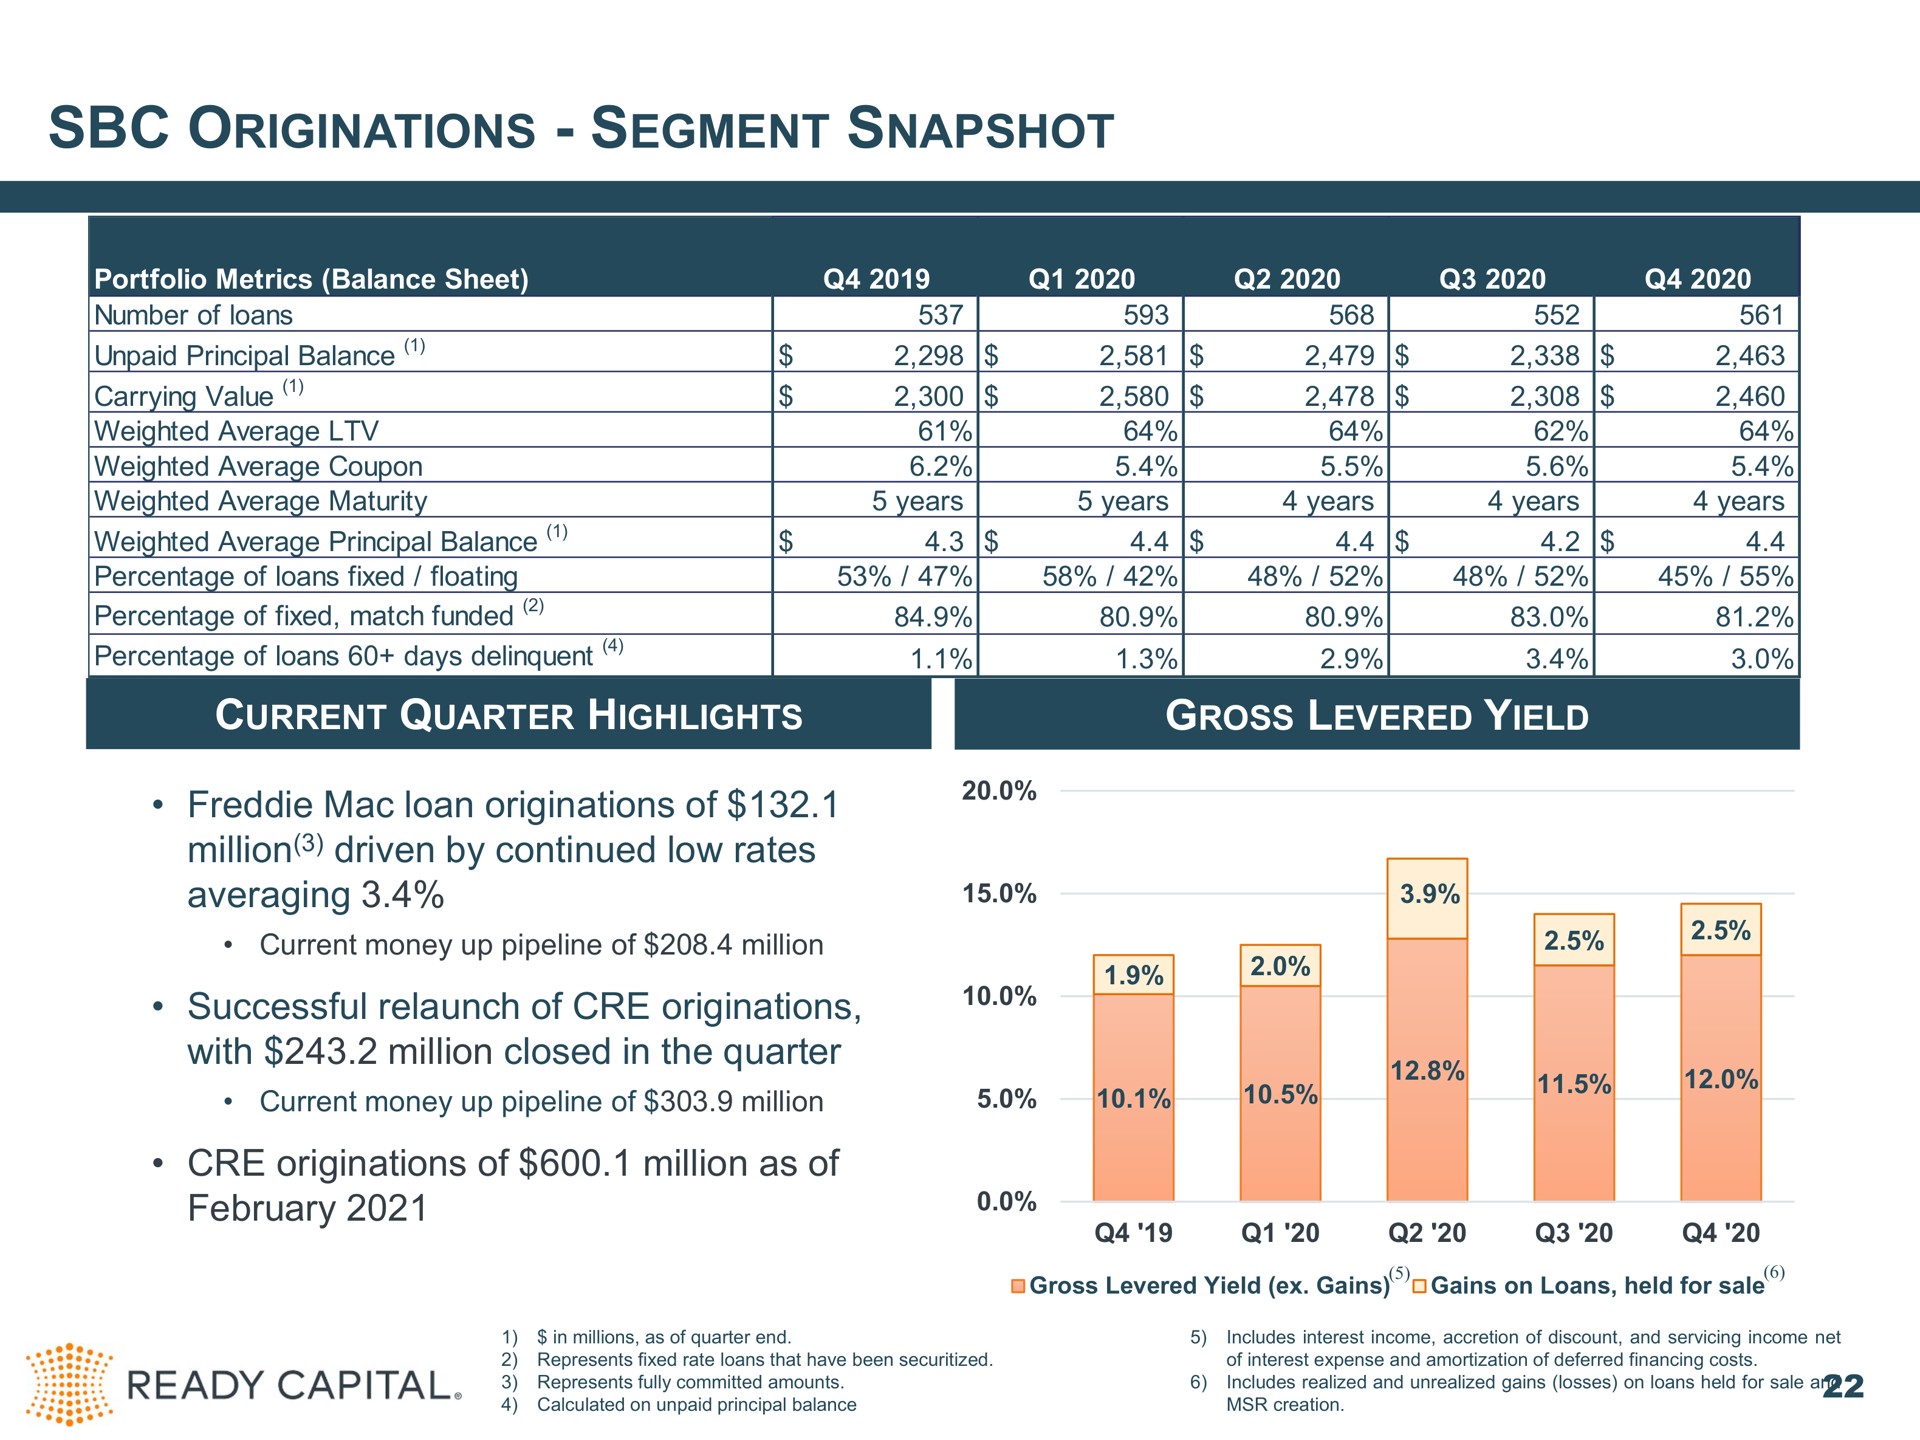 originations segment snapshot current quarter highlights gross levered yield mac loan originations of million driven by continued low rates averaging successful relaunch of originations with million closed in the quarter originations of million as of is | Ready Capital